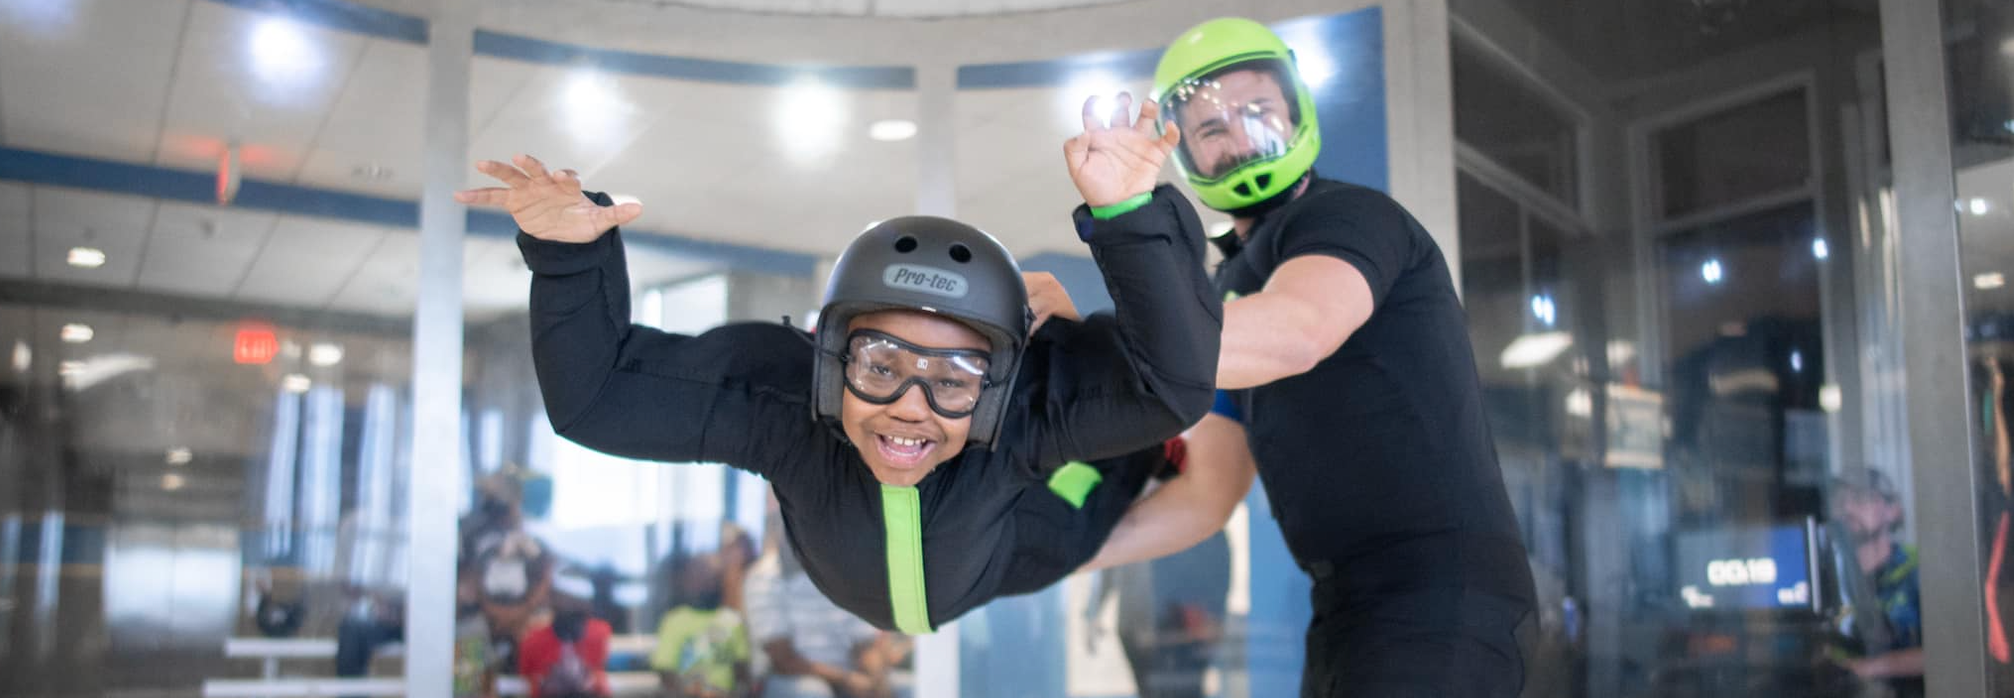 How Much Does Indoor Skydiving Cost? Paraclete XP Indoor Skydiving